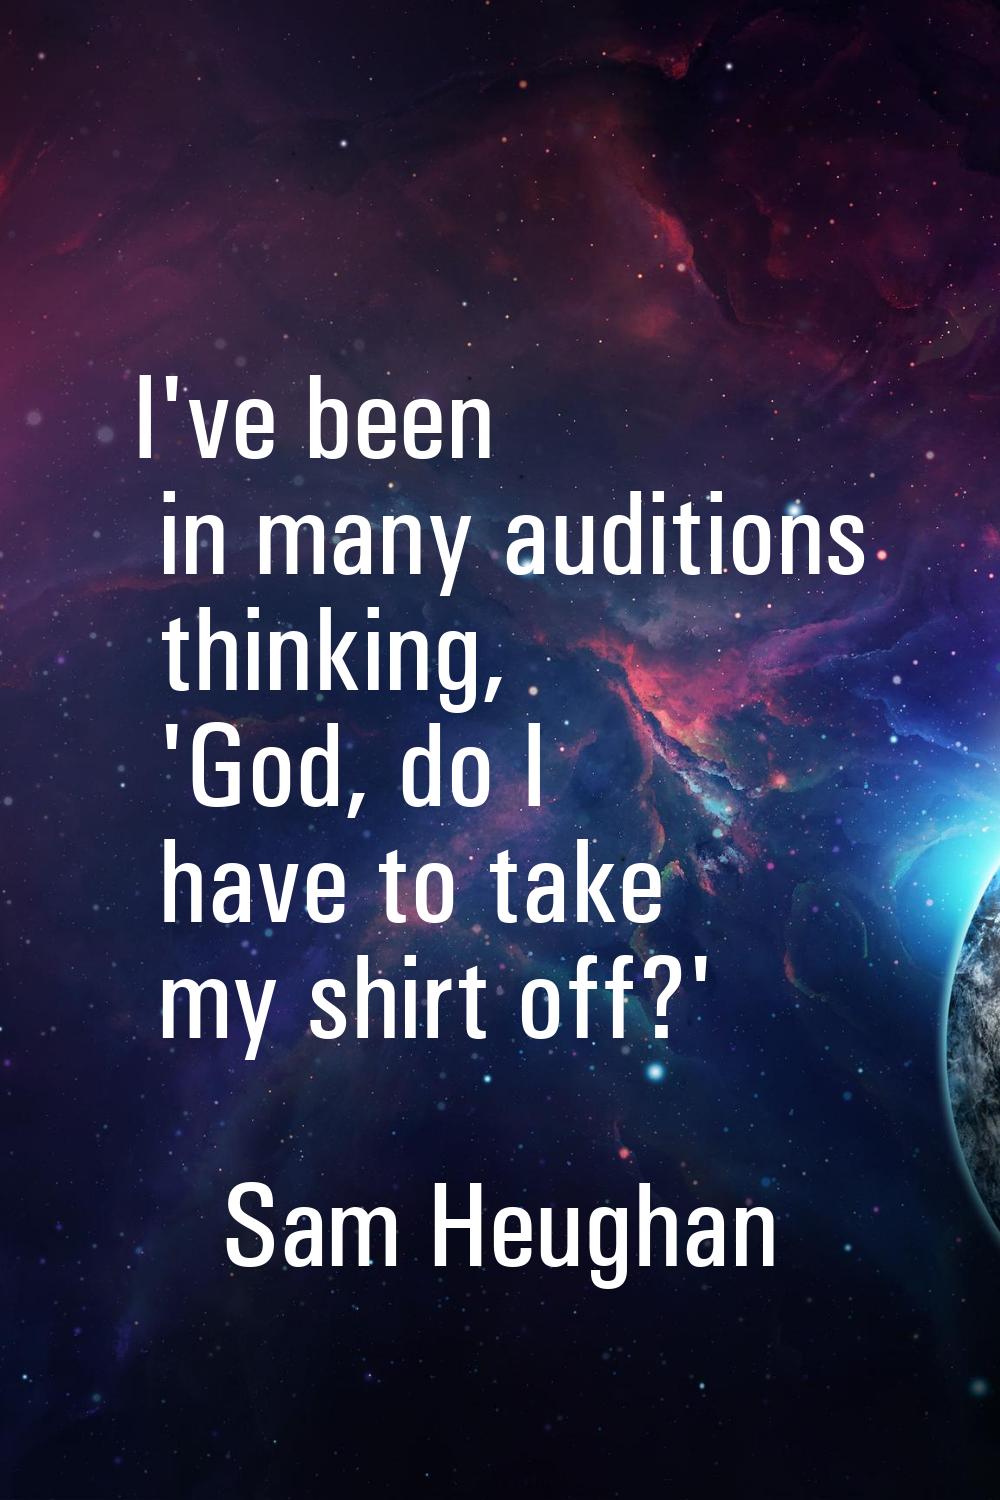 I've been in many auditions thinking, 'God, do I have to take my shirt off?'